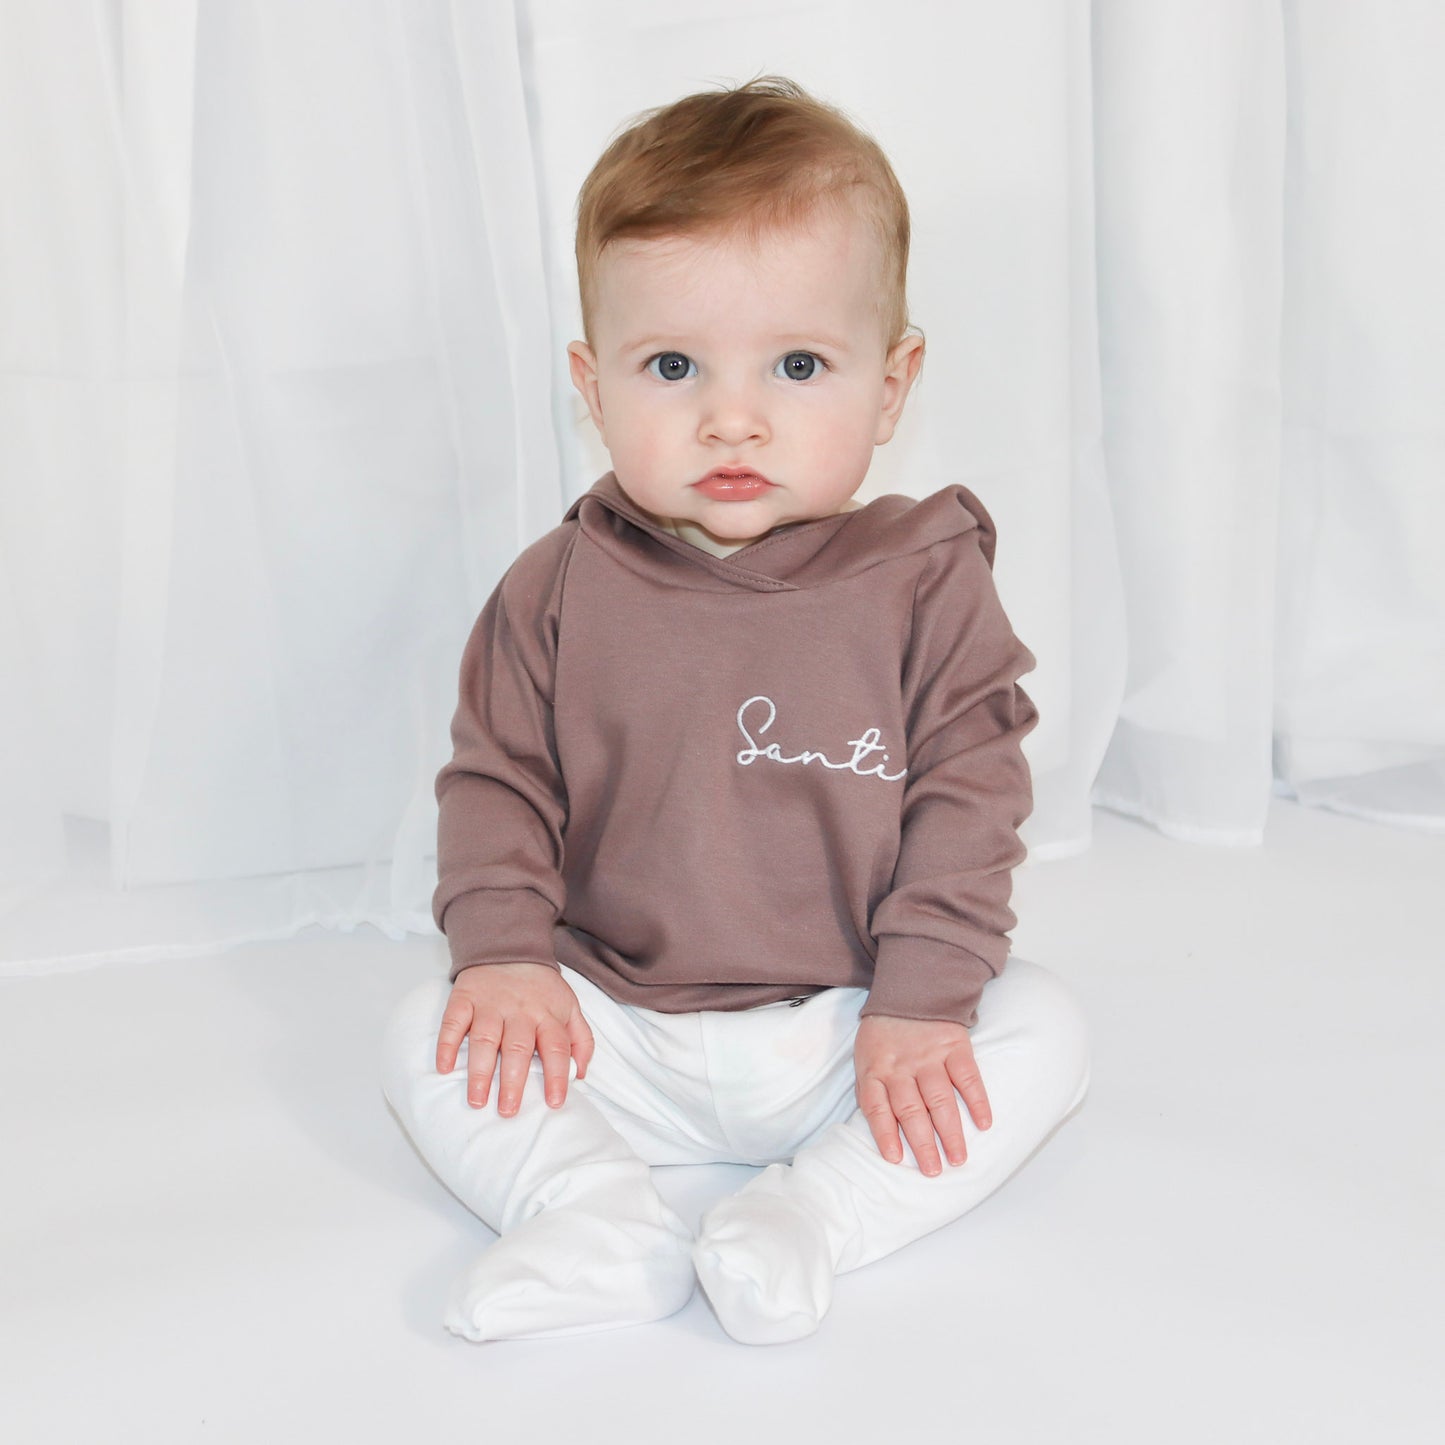 Mocha & Cream Hooded Top Footie Lounge Set (Made to Order)